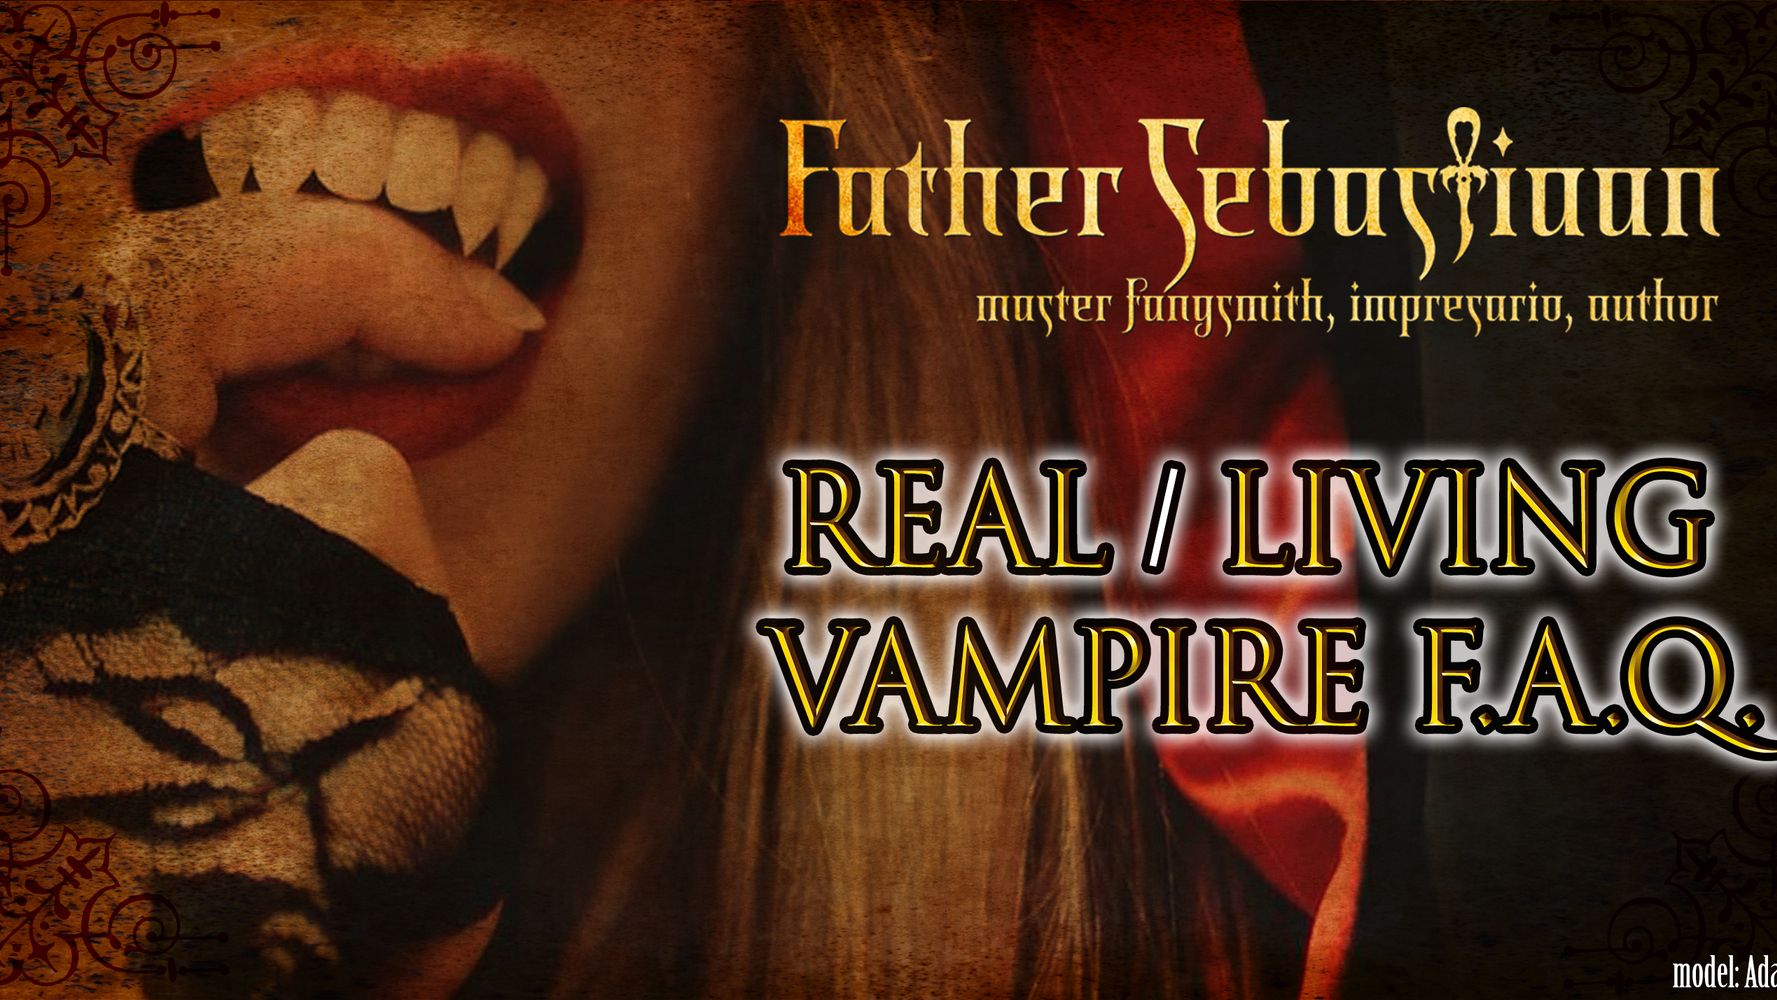 The Living Vampire / Real Vampire F.A.Q. (Frequently Asked Questions)